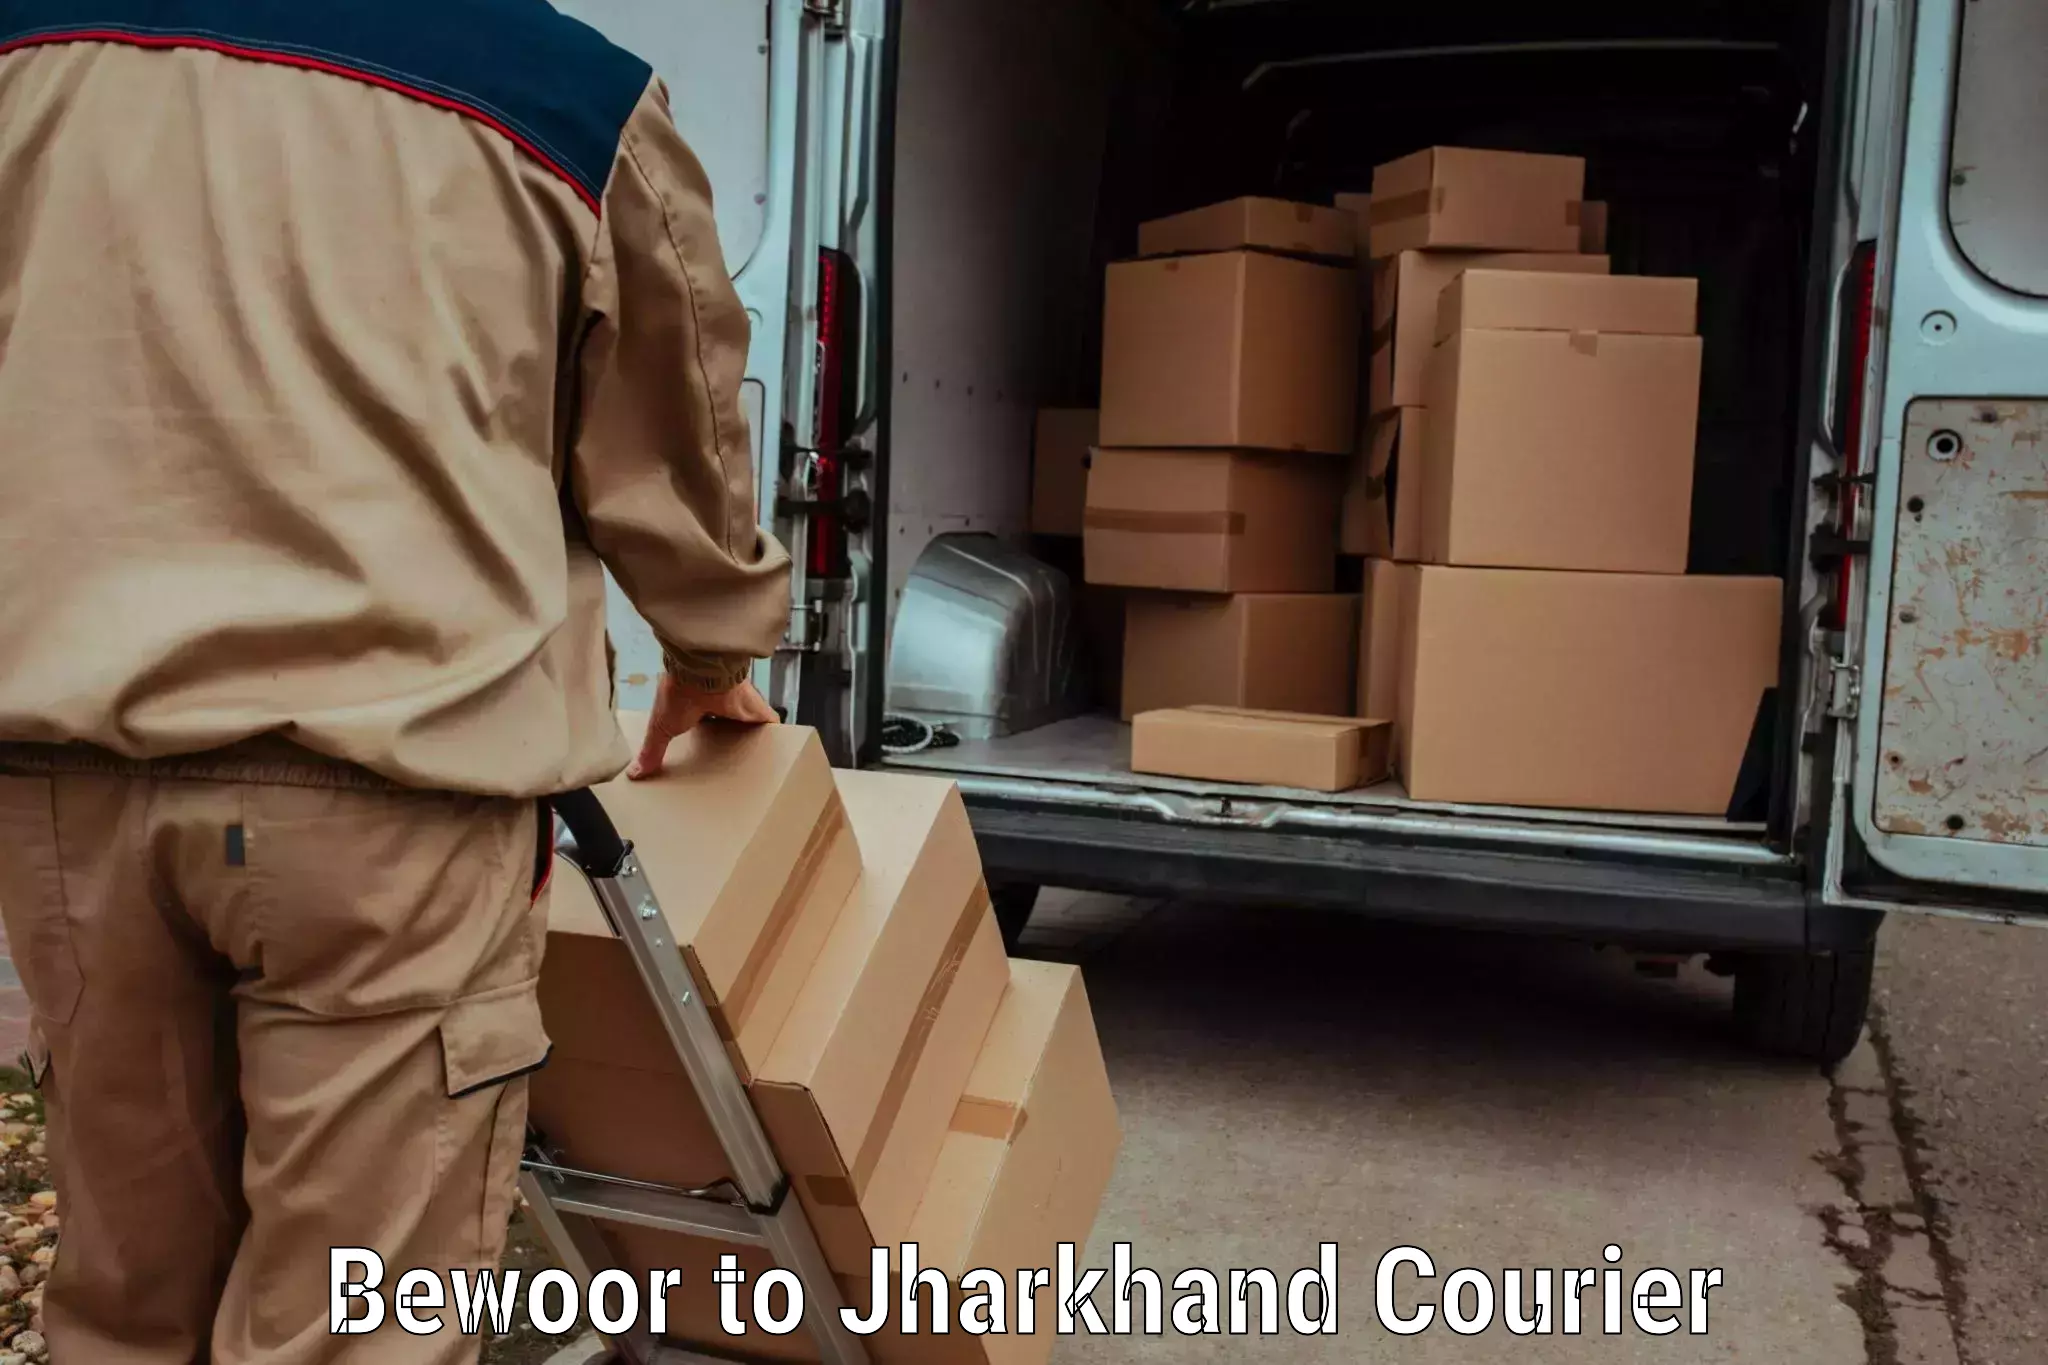 Courier service comparison Bewoor to Dhanbad